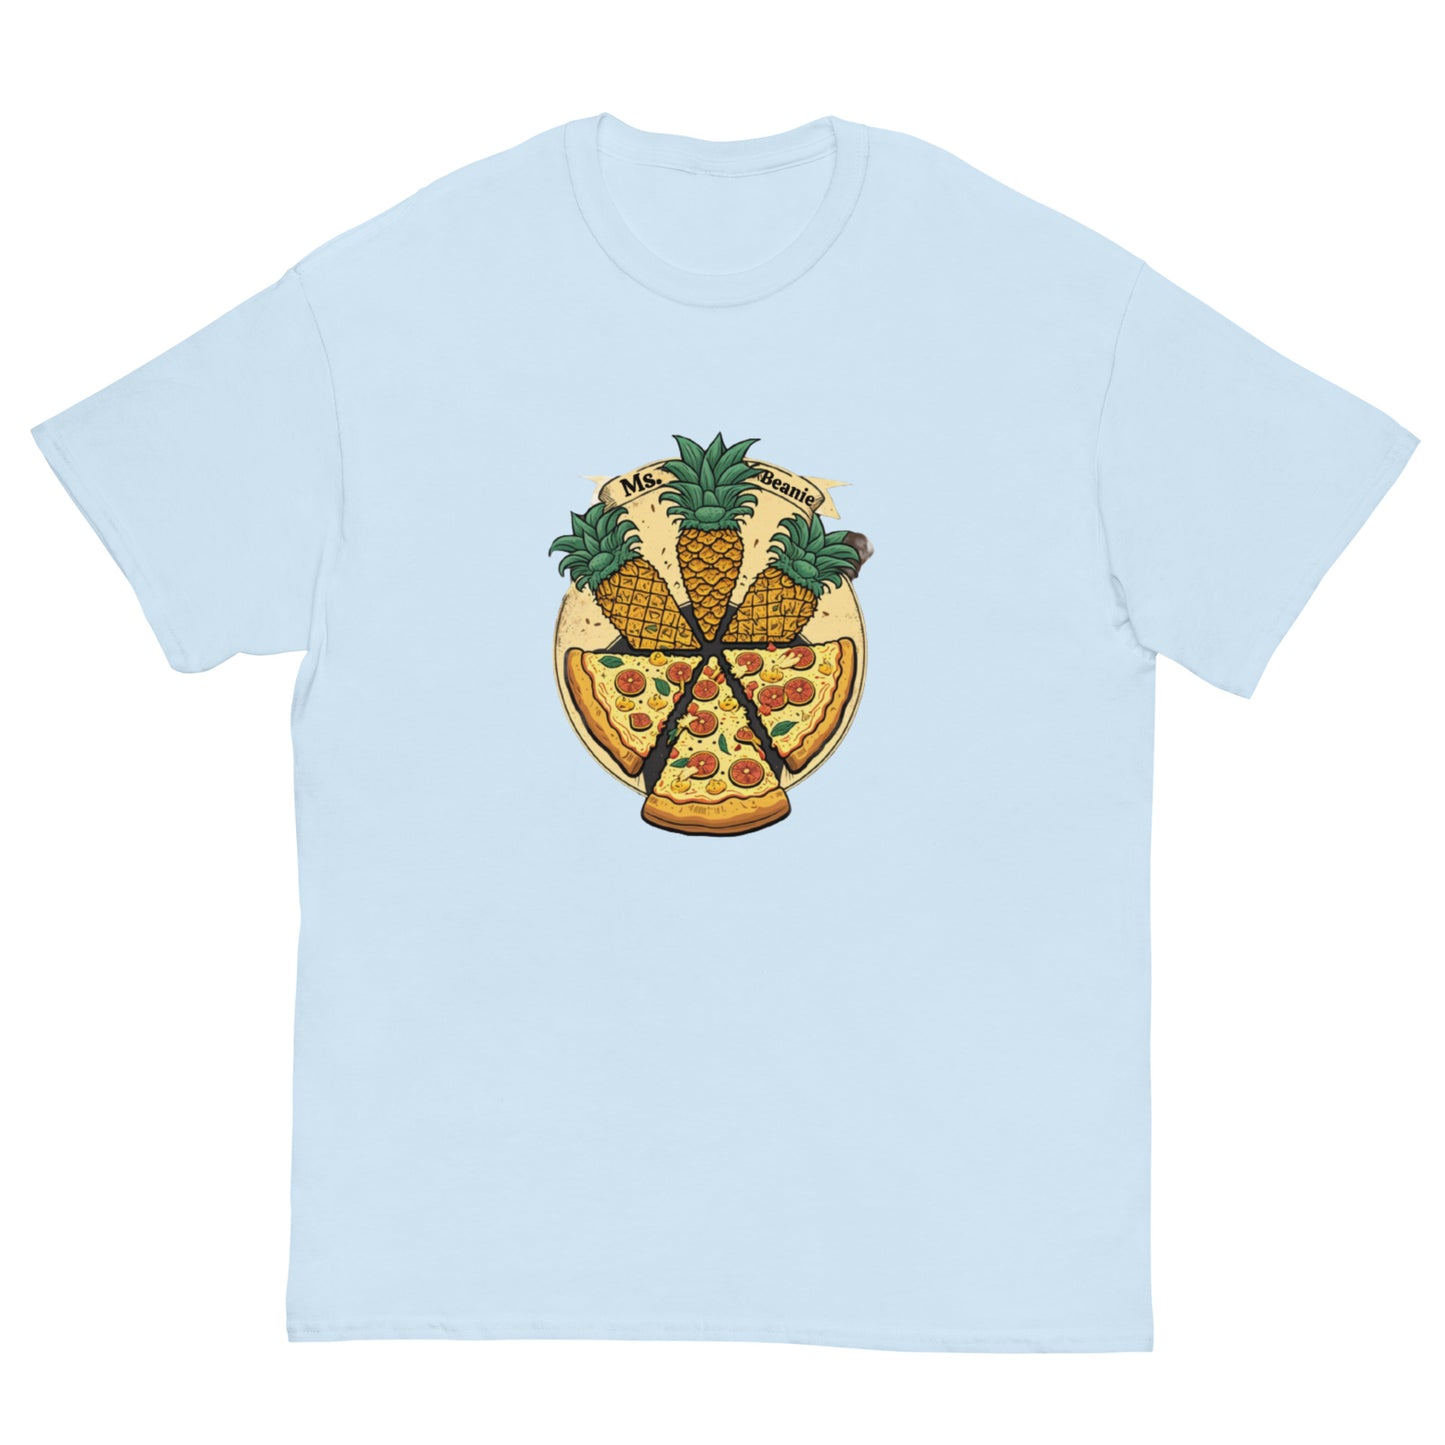 Adult Pineapple on Pizza T-Shirt